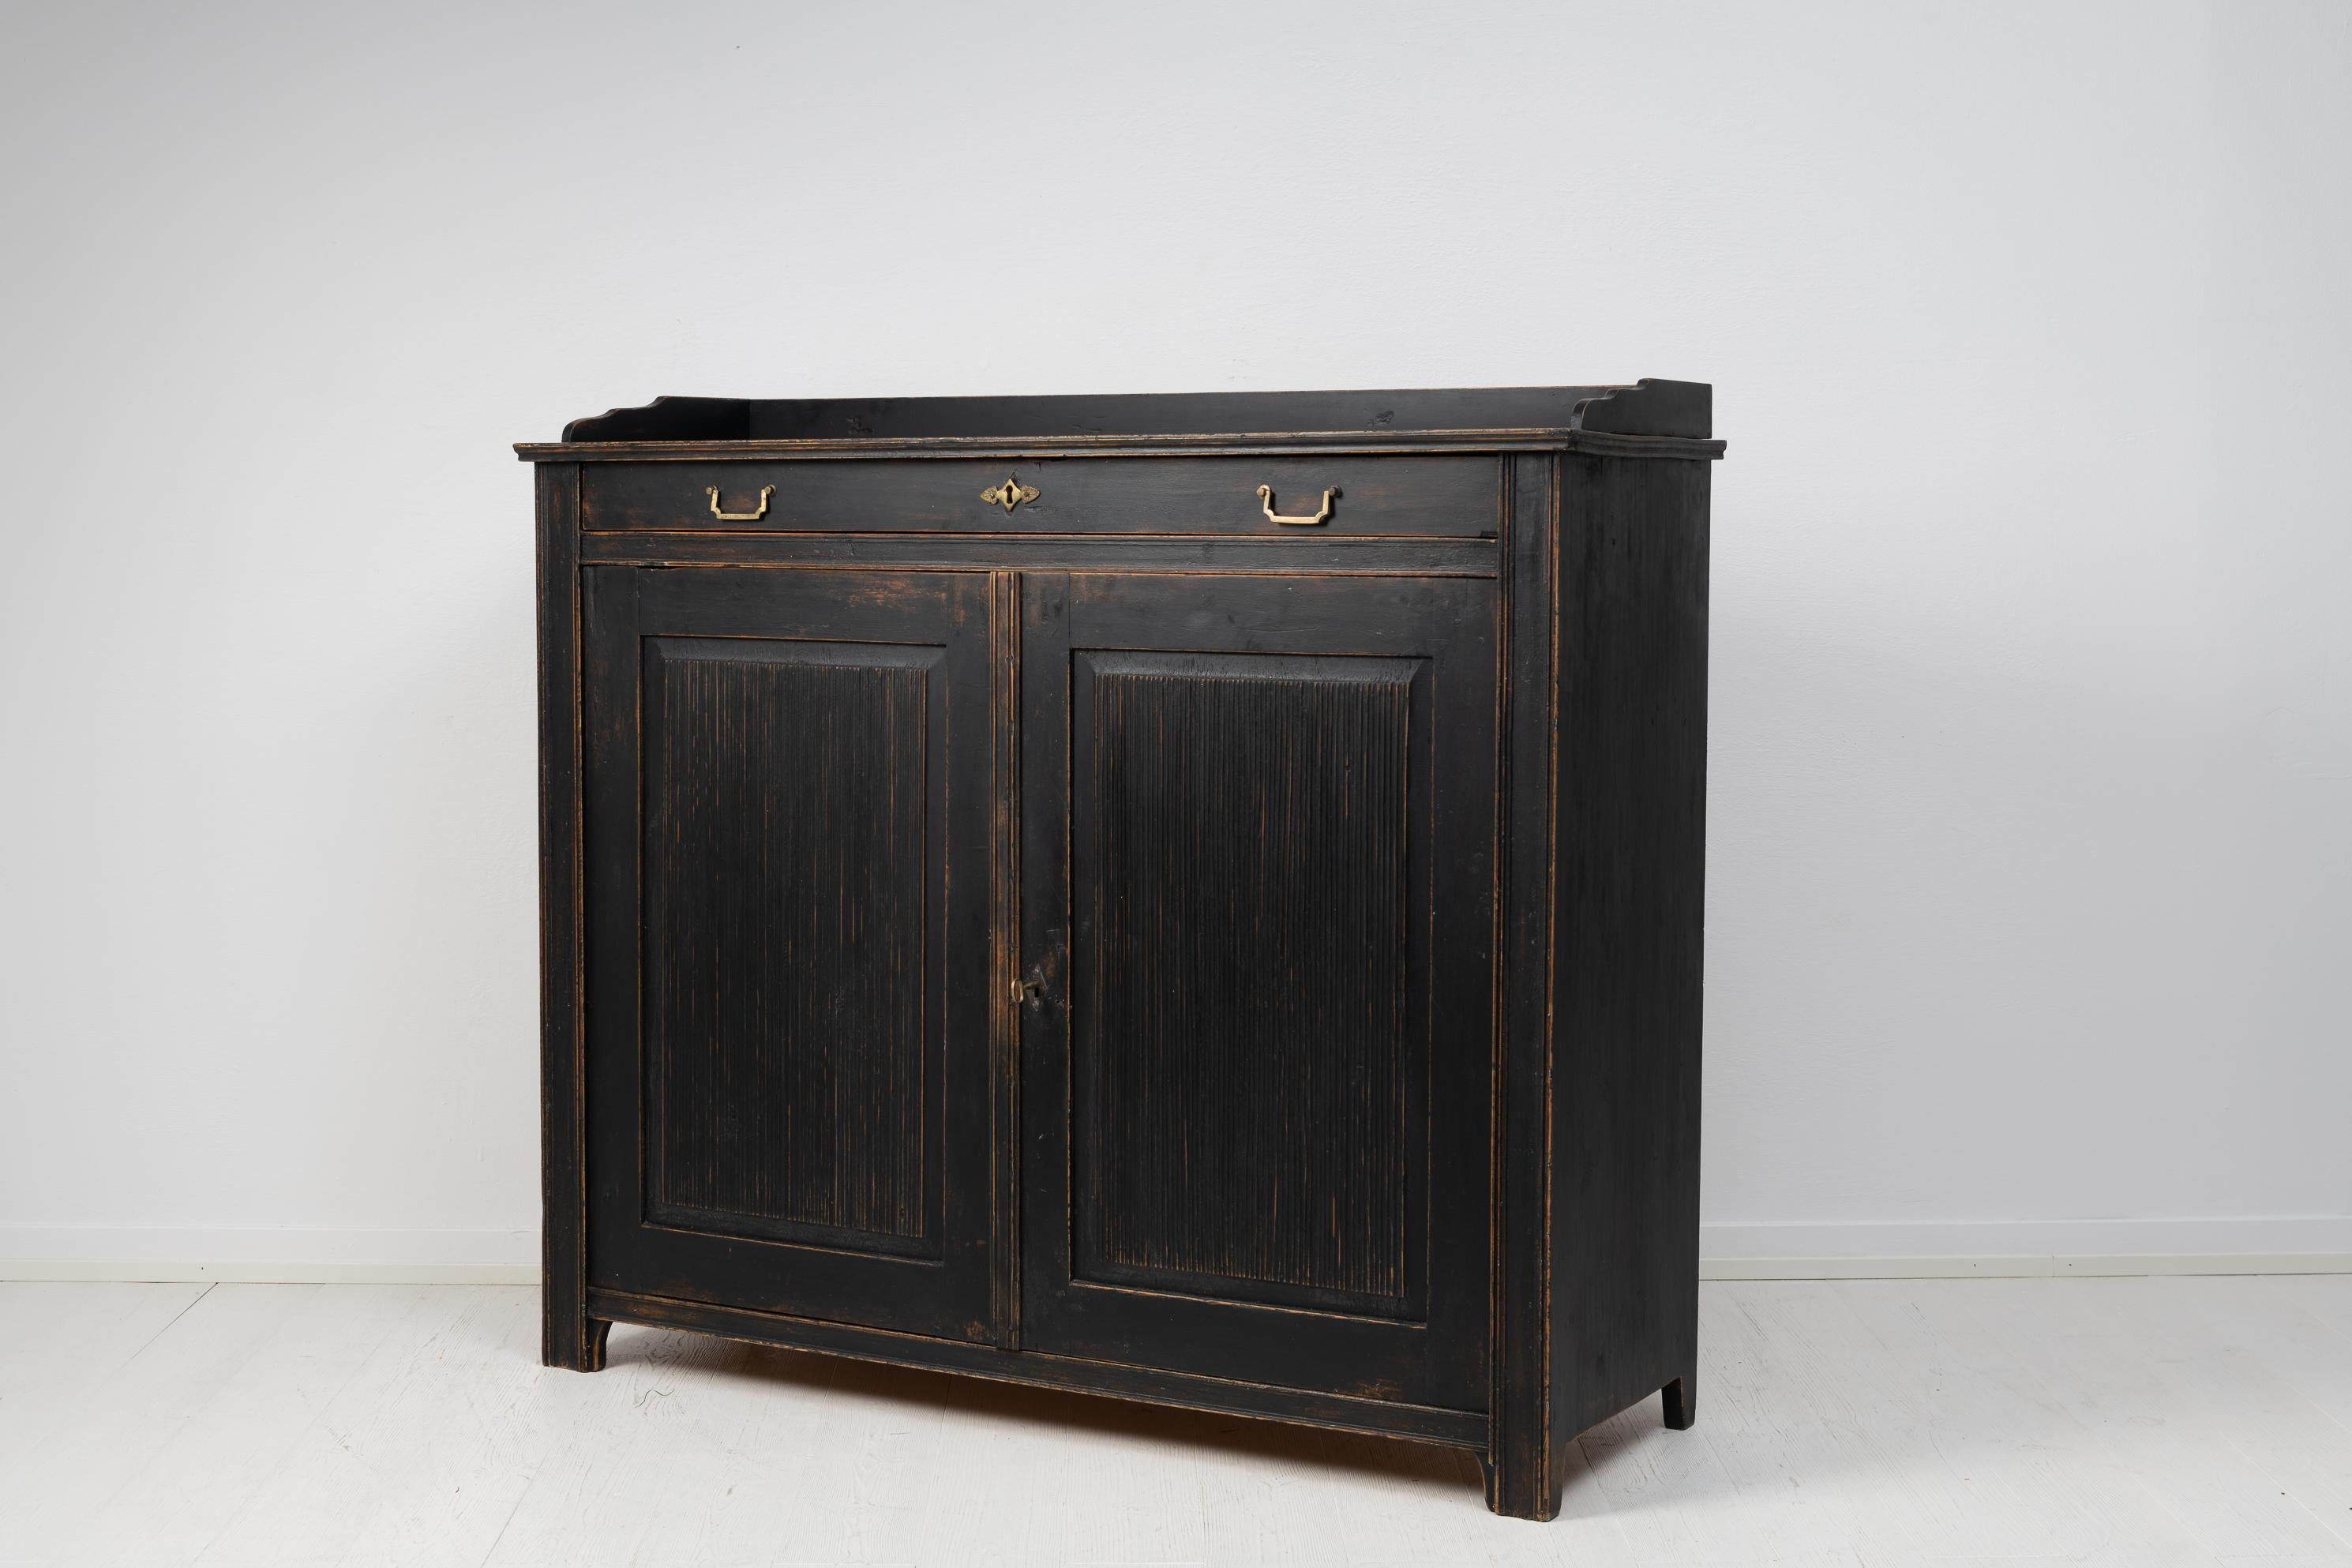 Hand-Crafted 19th Century Swedish Black Gustavian Style Sideboard